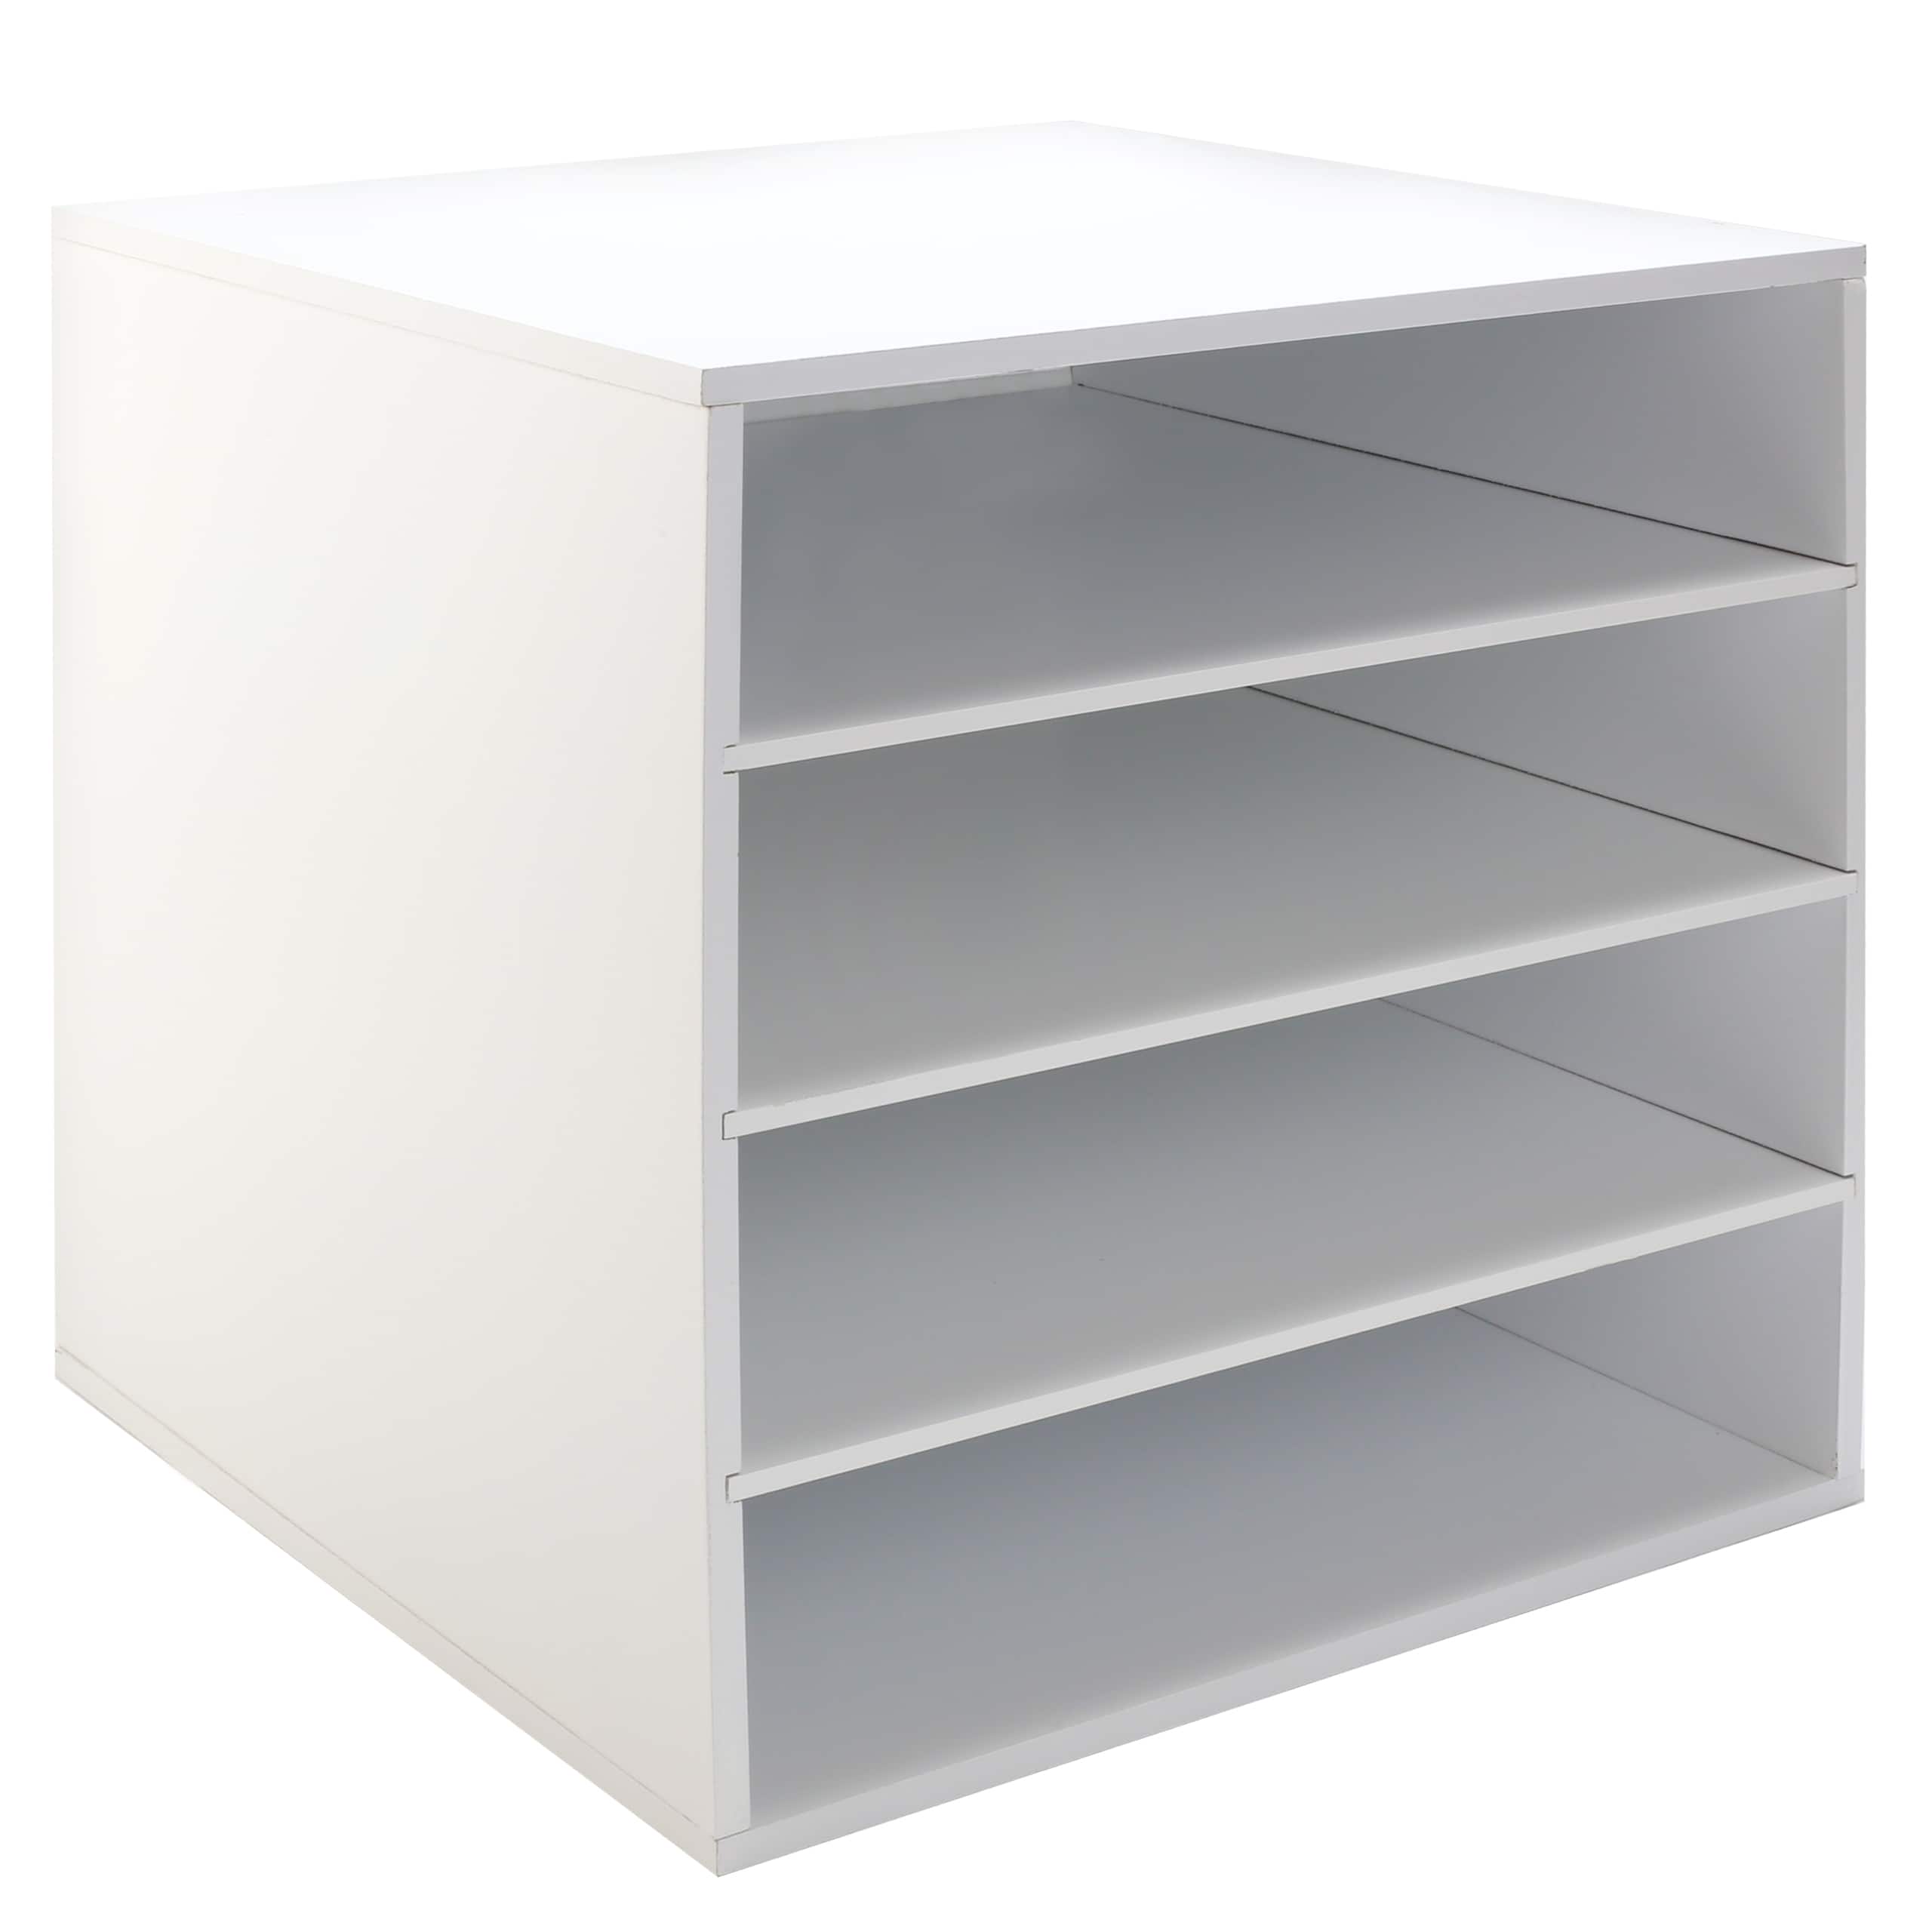 Find The Organizer Cube 4 Shelf By Ashland At Michaels